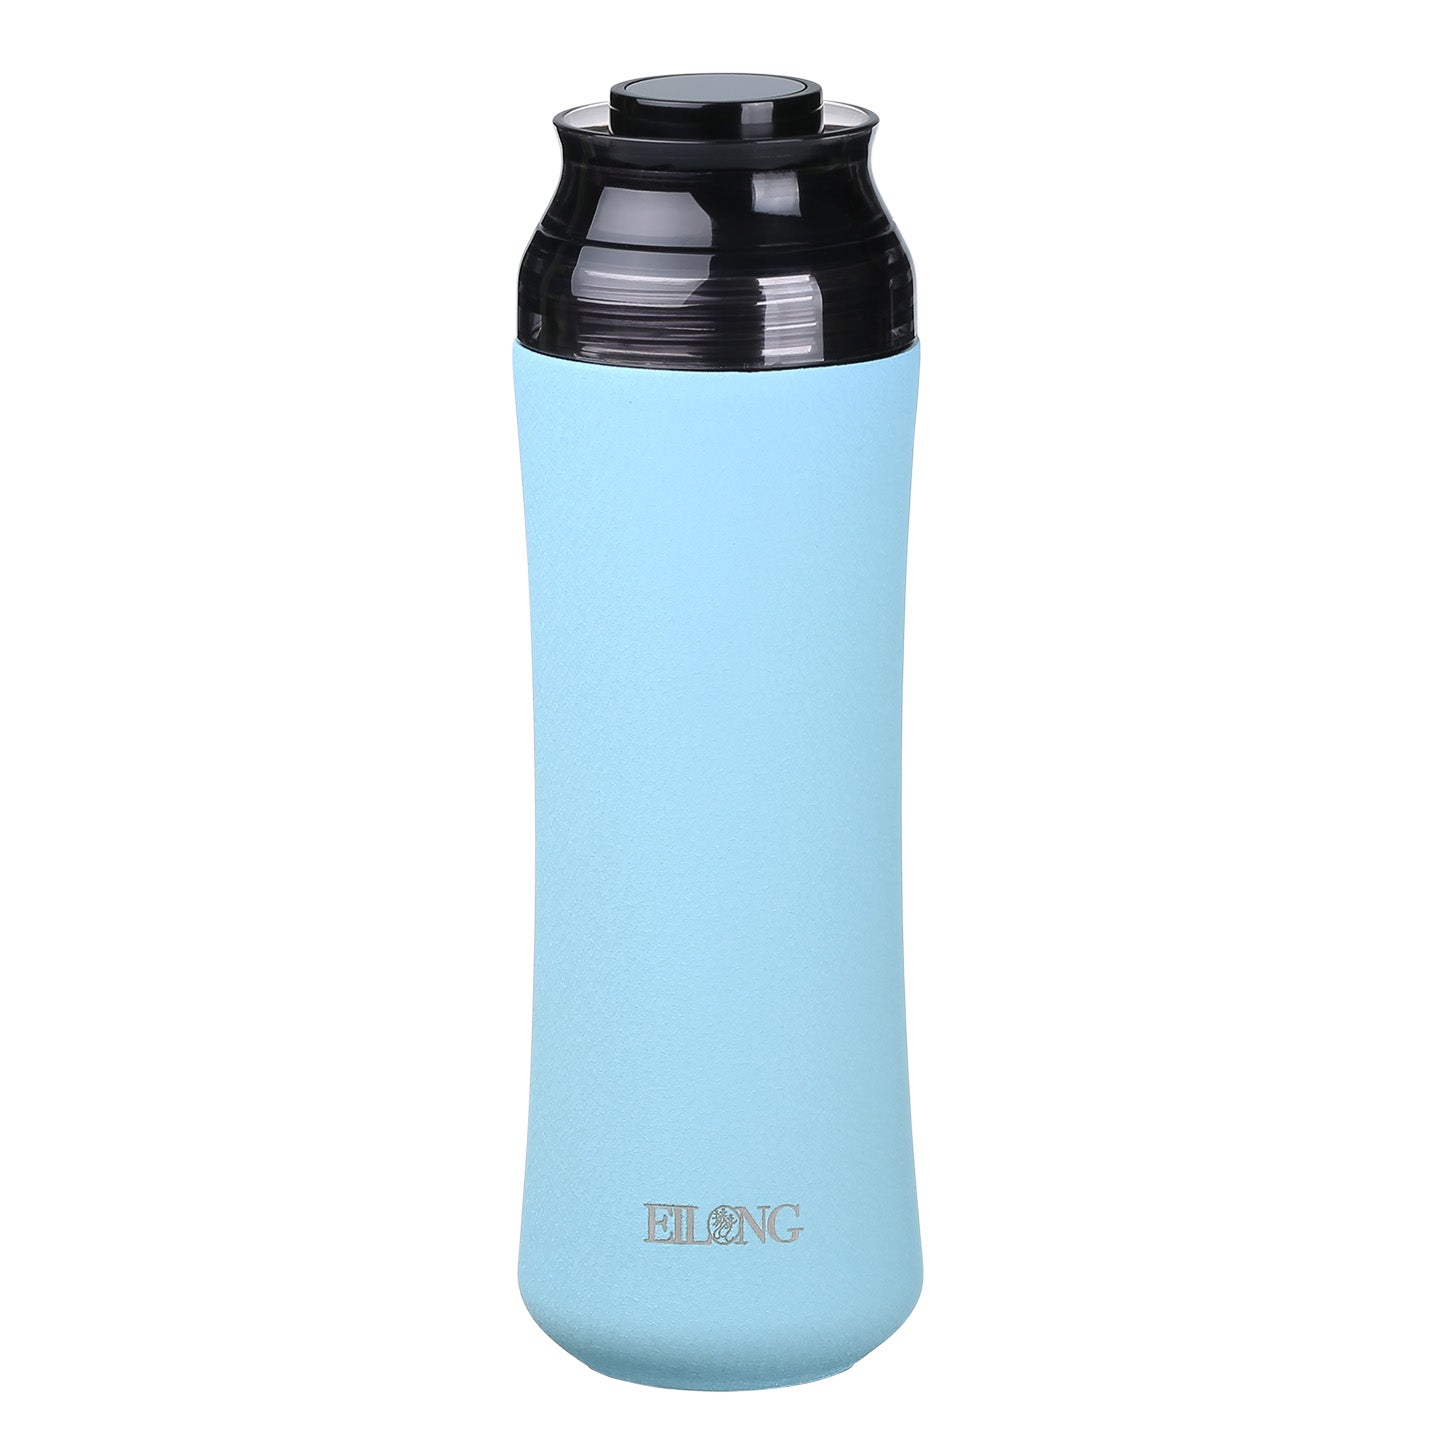 Stainless Steel Vacuum Cup Straw Thermos Travel - 400ml Double